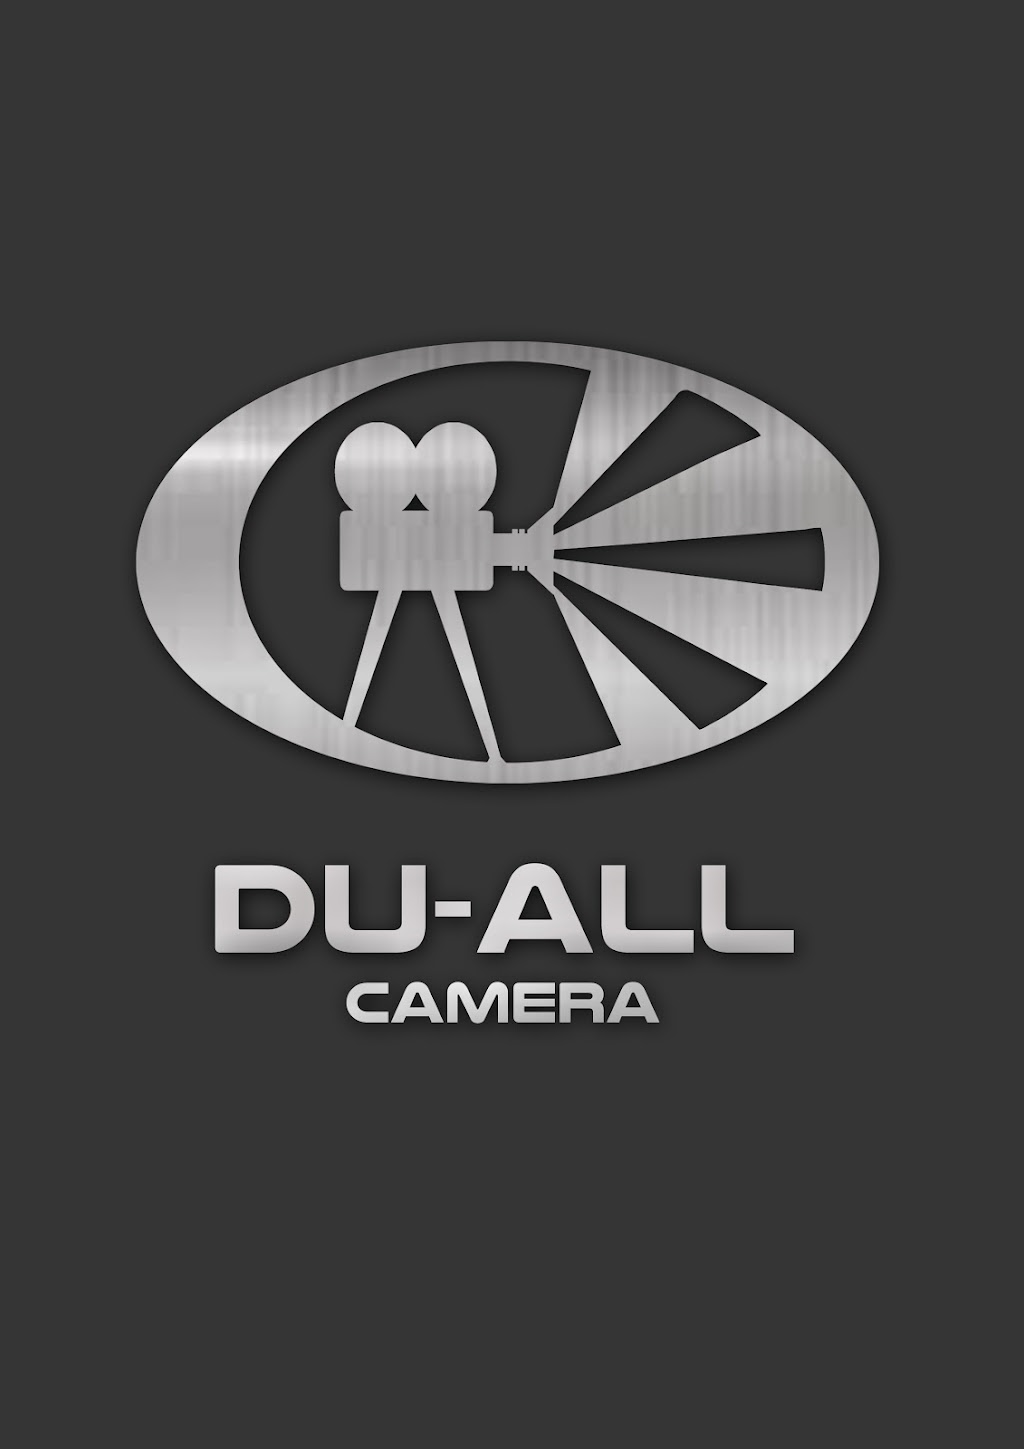 Du-All Camera | 772-774 Central Ave, Westfield, NJ 07090 | Phone: (212) 643-1042